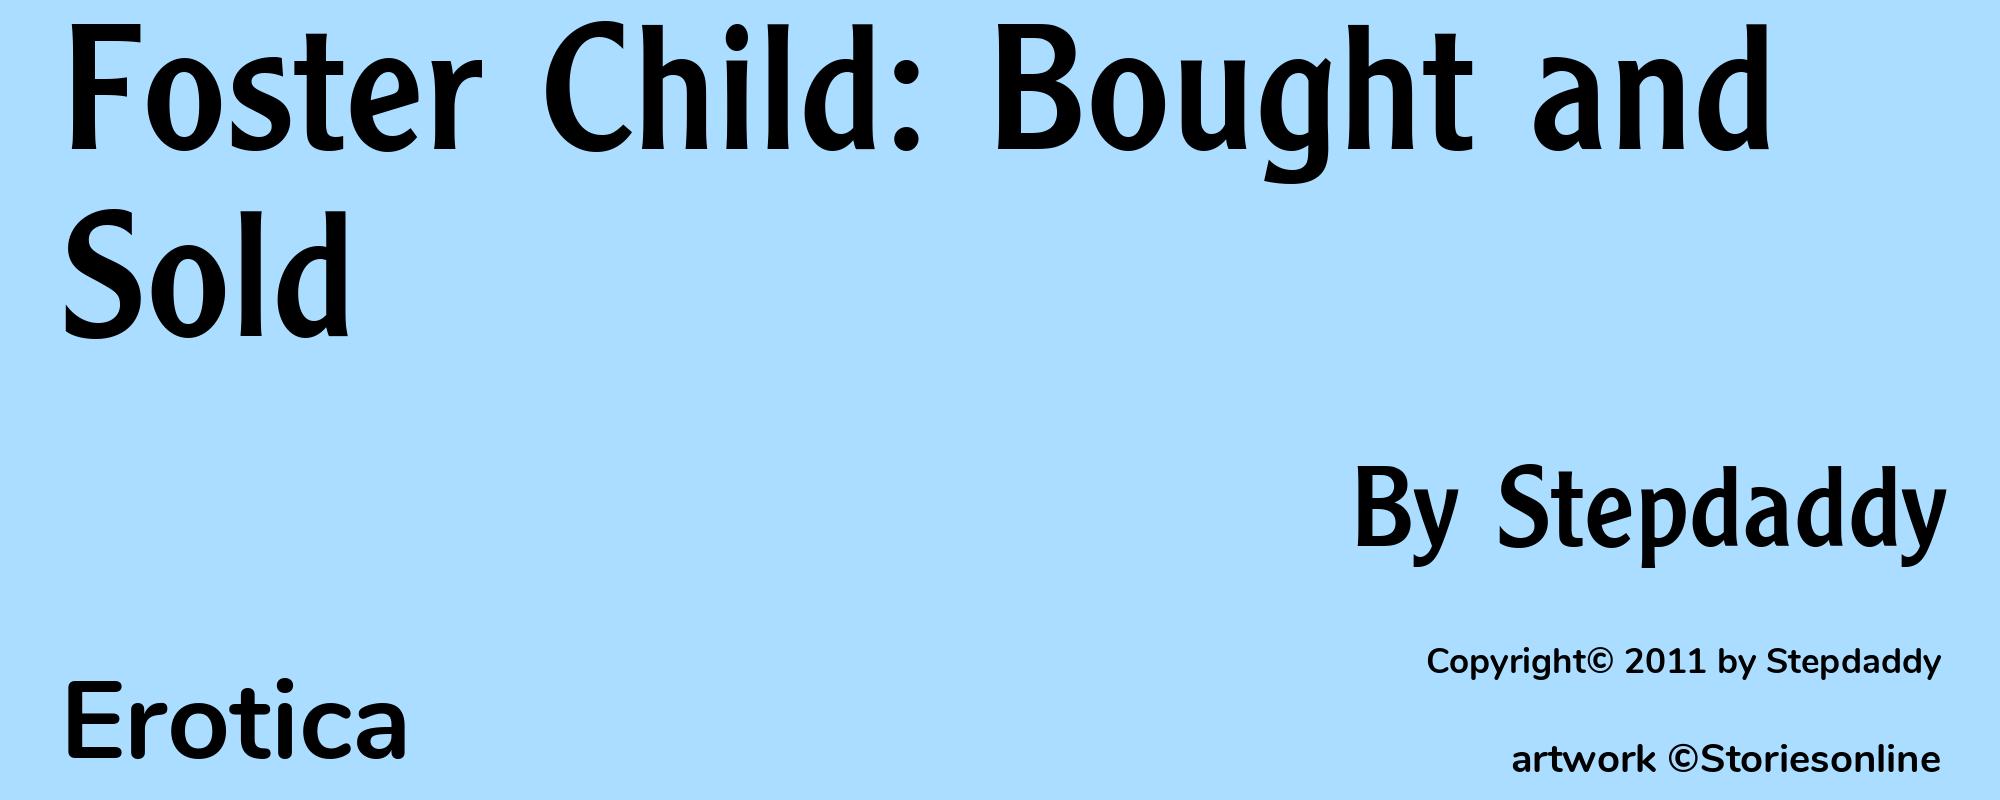 Foster Child: Bought and Sold - Cover